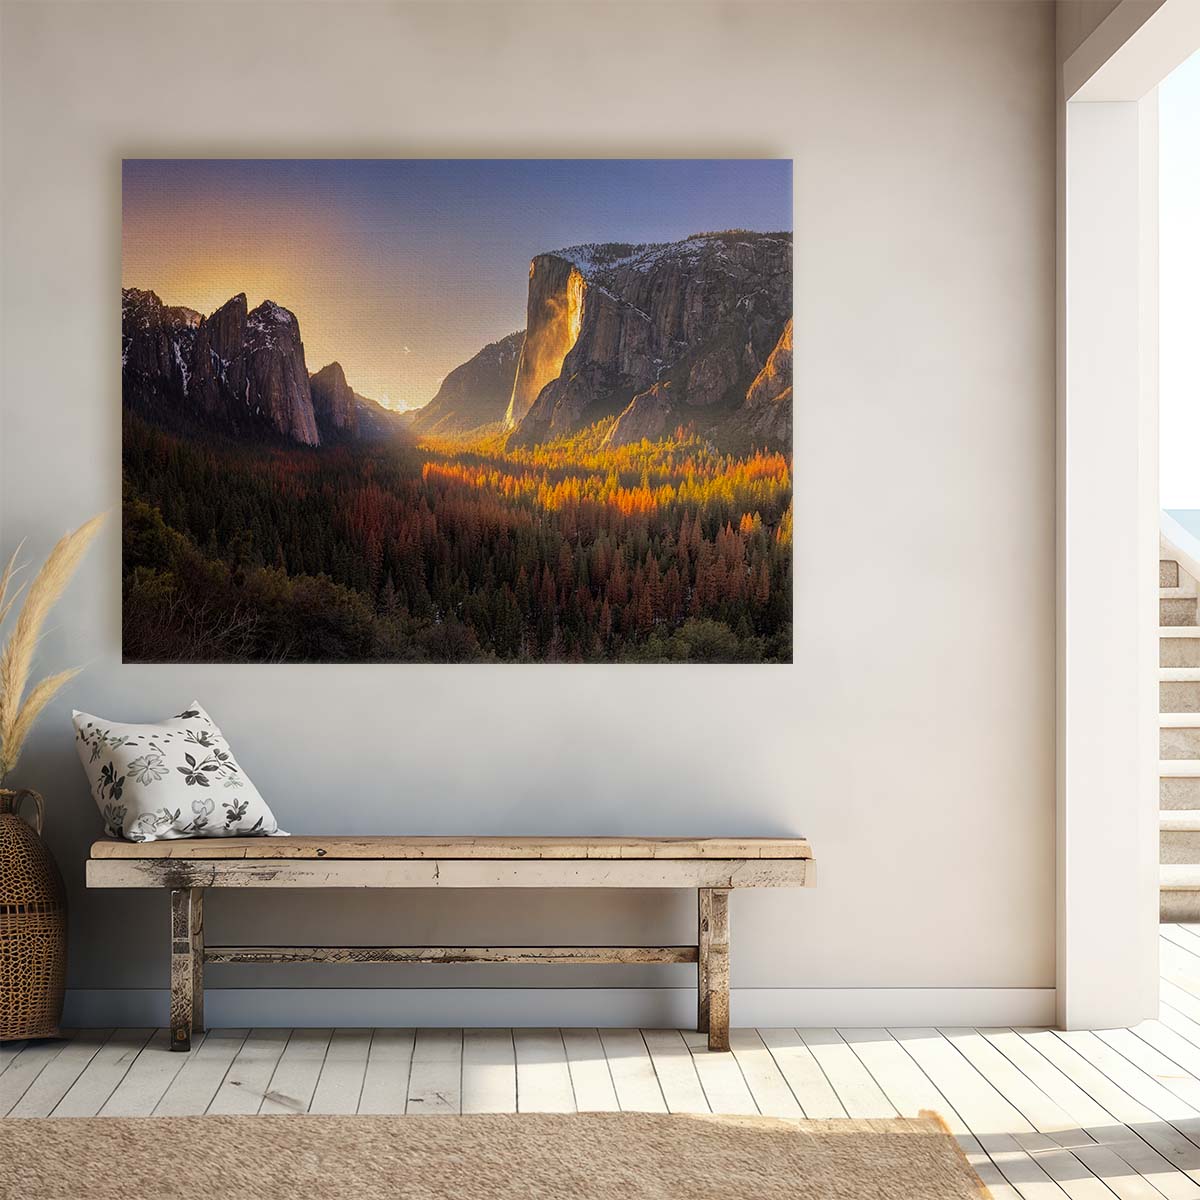 Yosemite Firefall Autumn Glow Panoramic Wall Art by Luxuriance Designs. Made in USA.